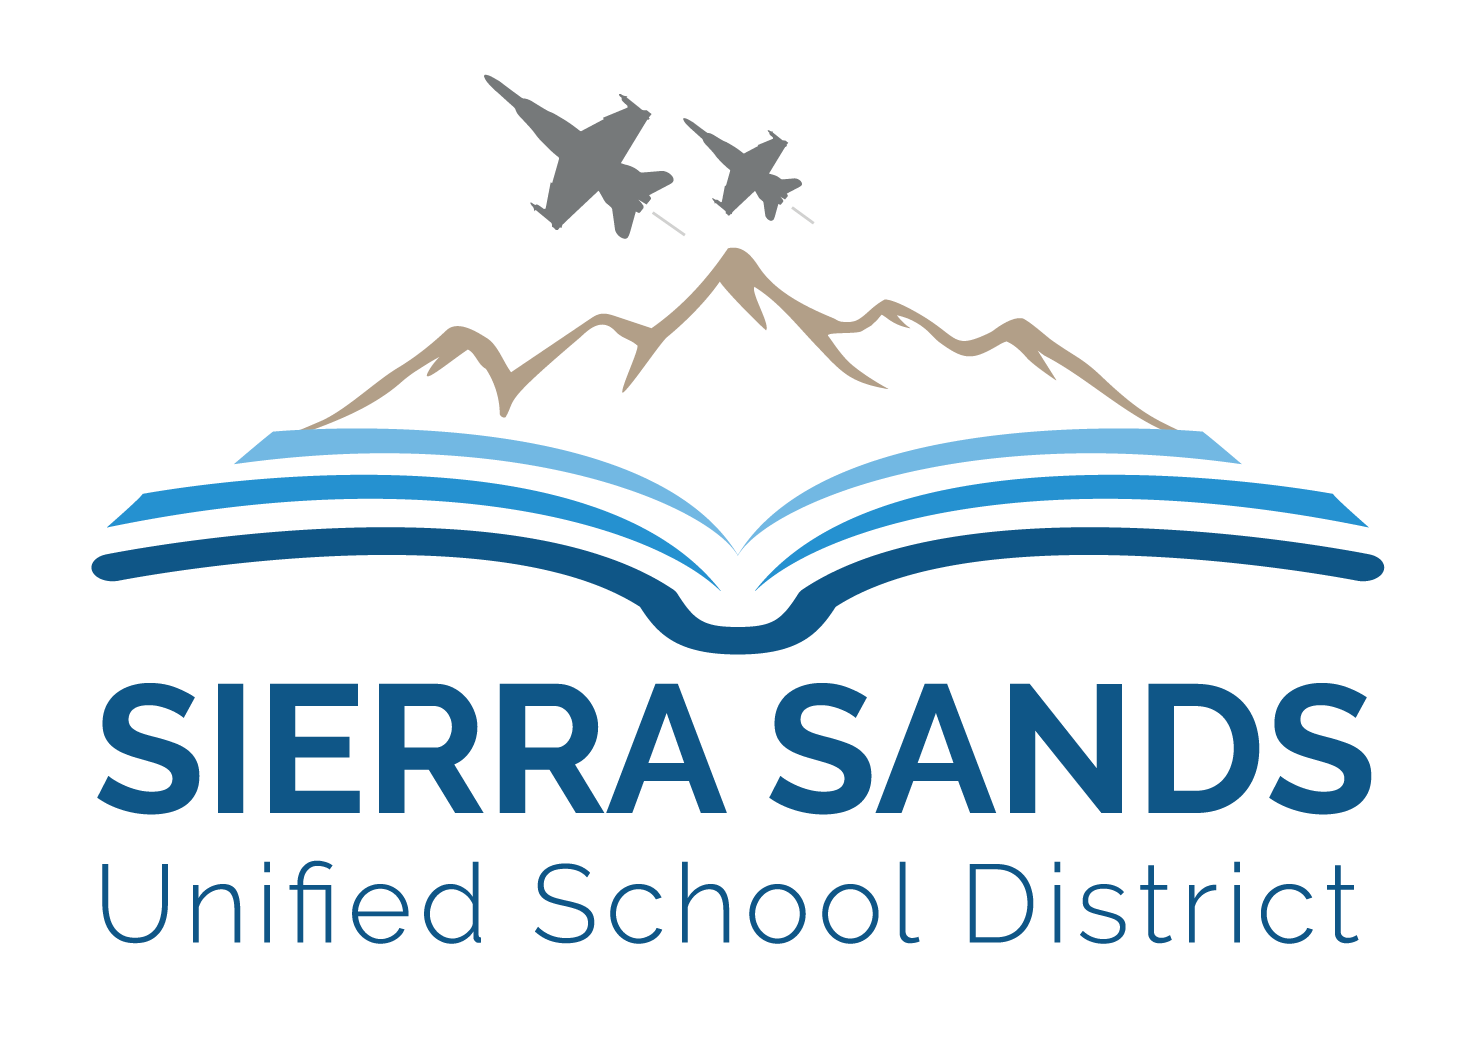 Image displays the logo for Sierra Sands Unified School District.